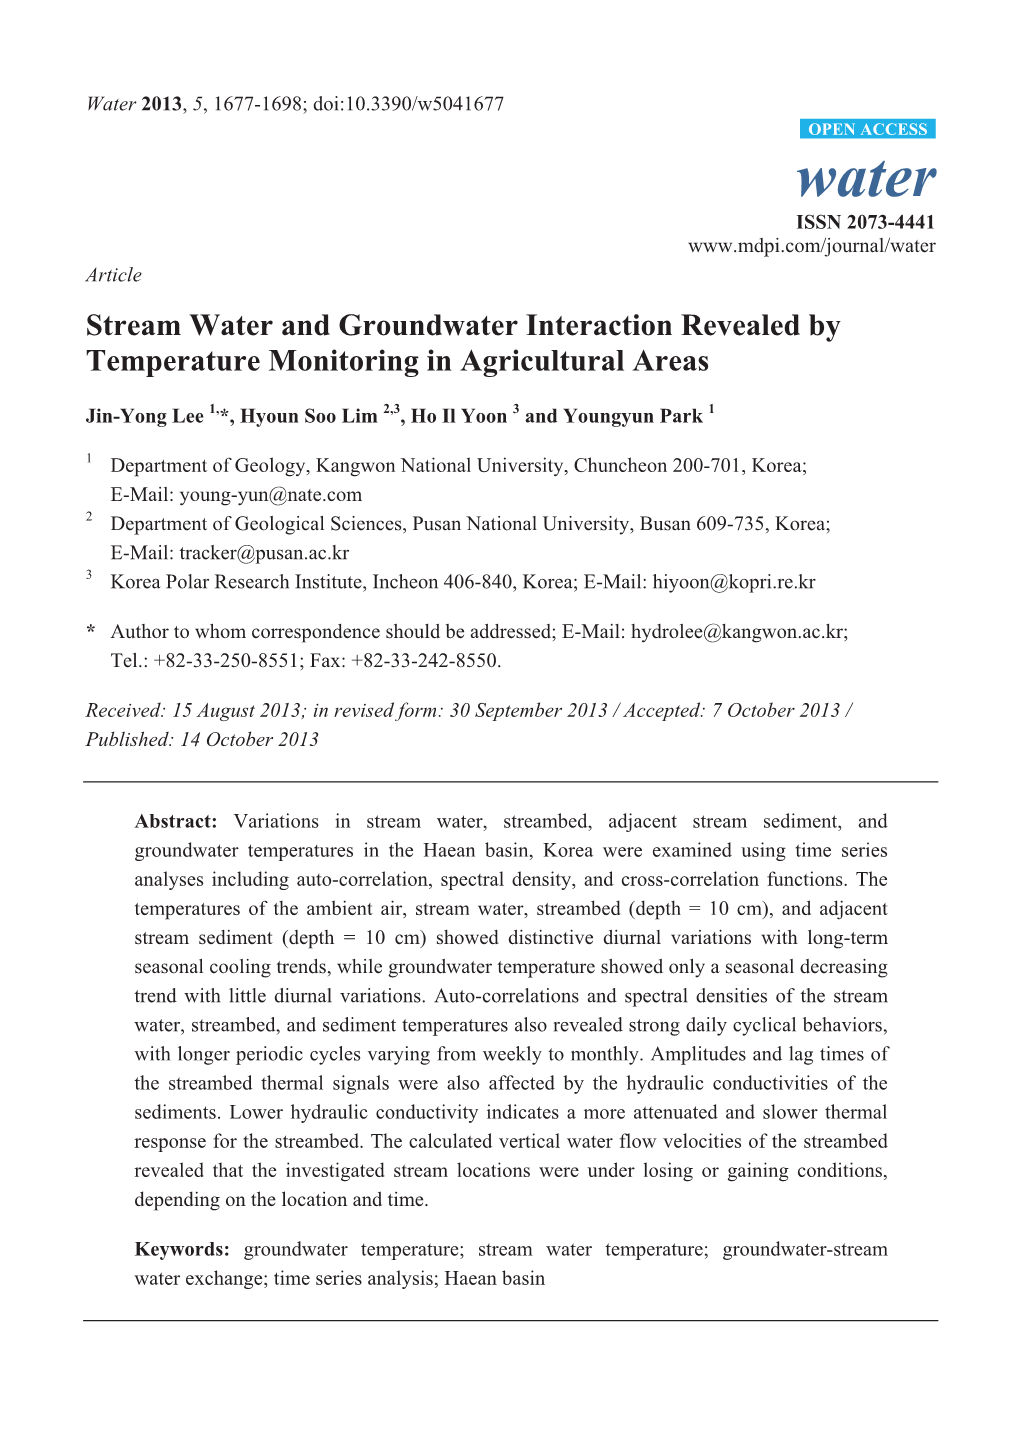 Stream Water and Groundwater Interaction Revealed by Temperature Monitoring in Agricultural Areas